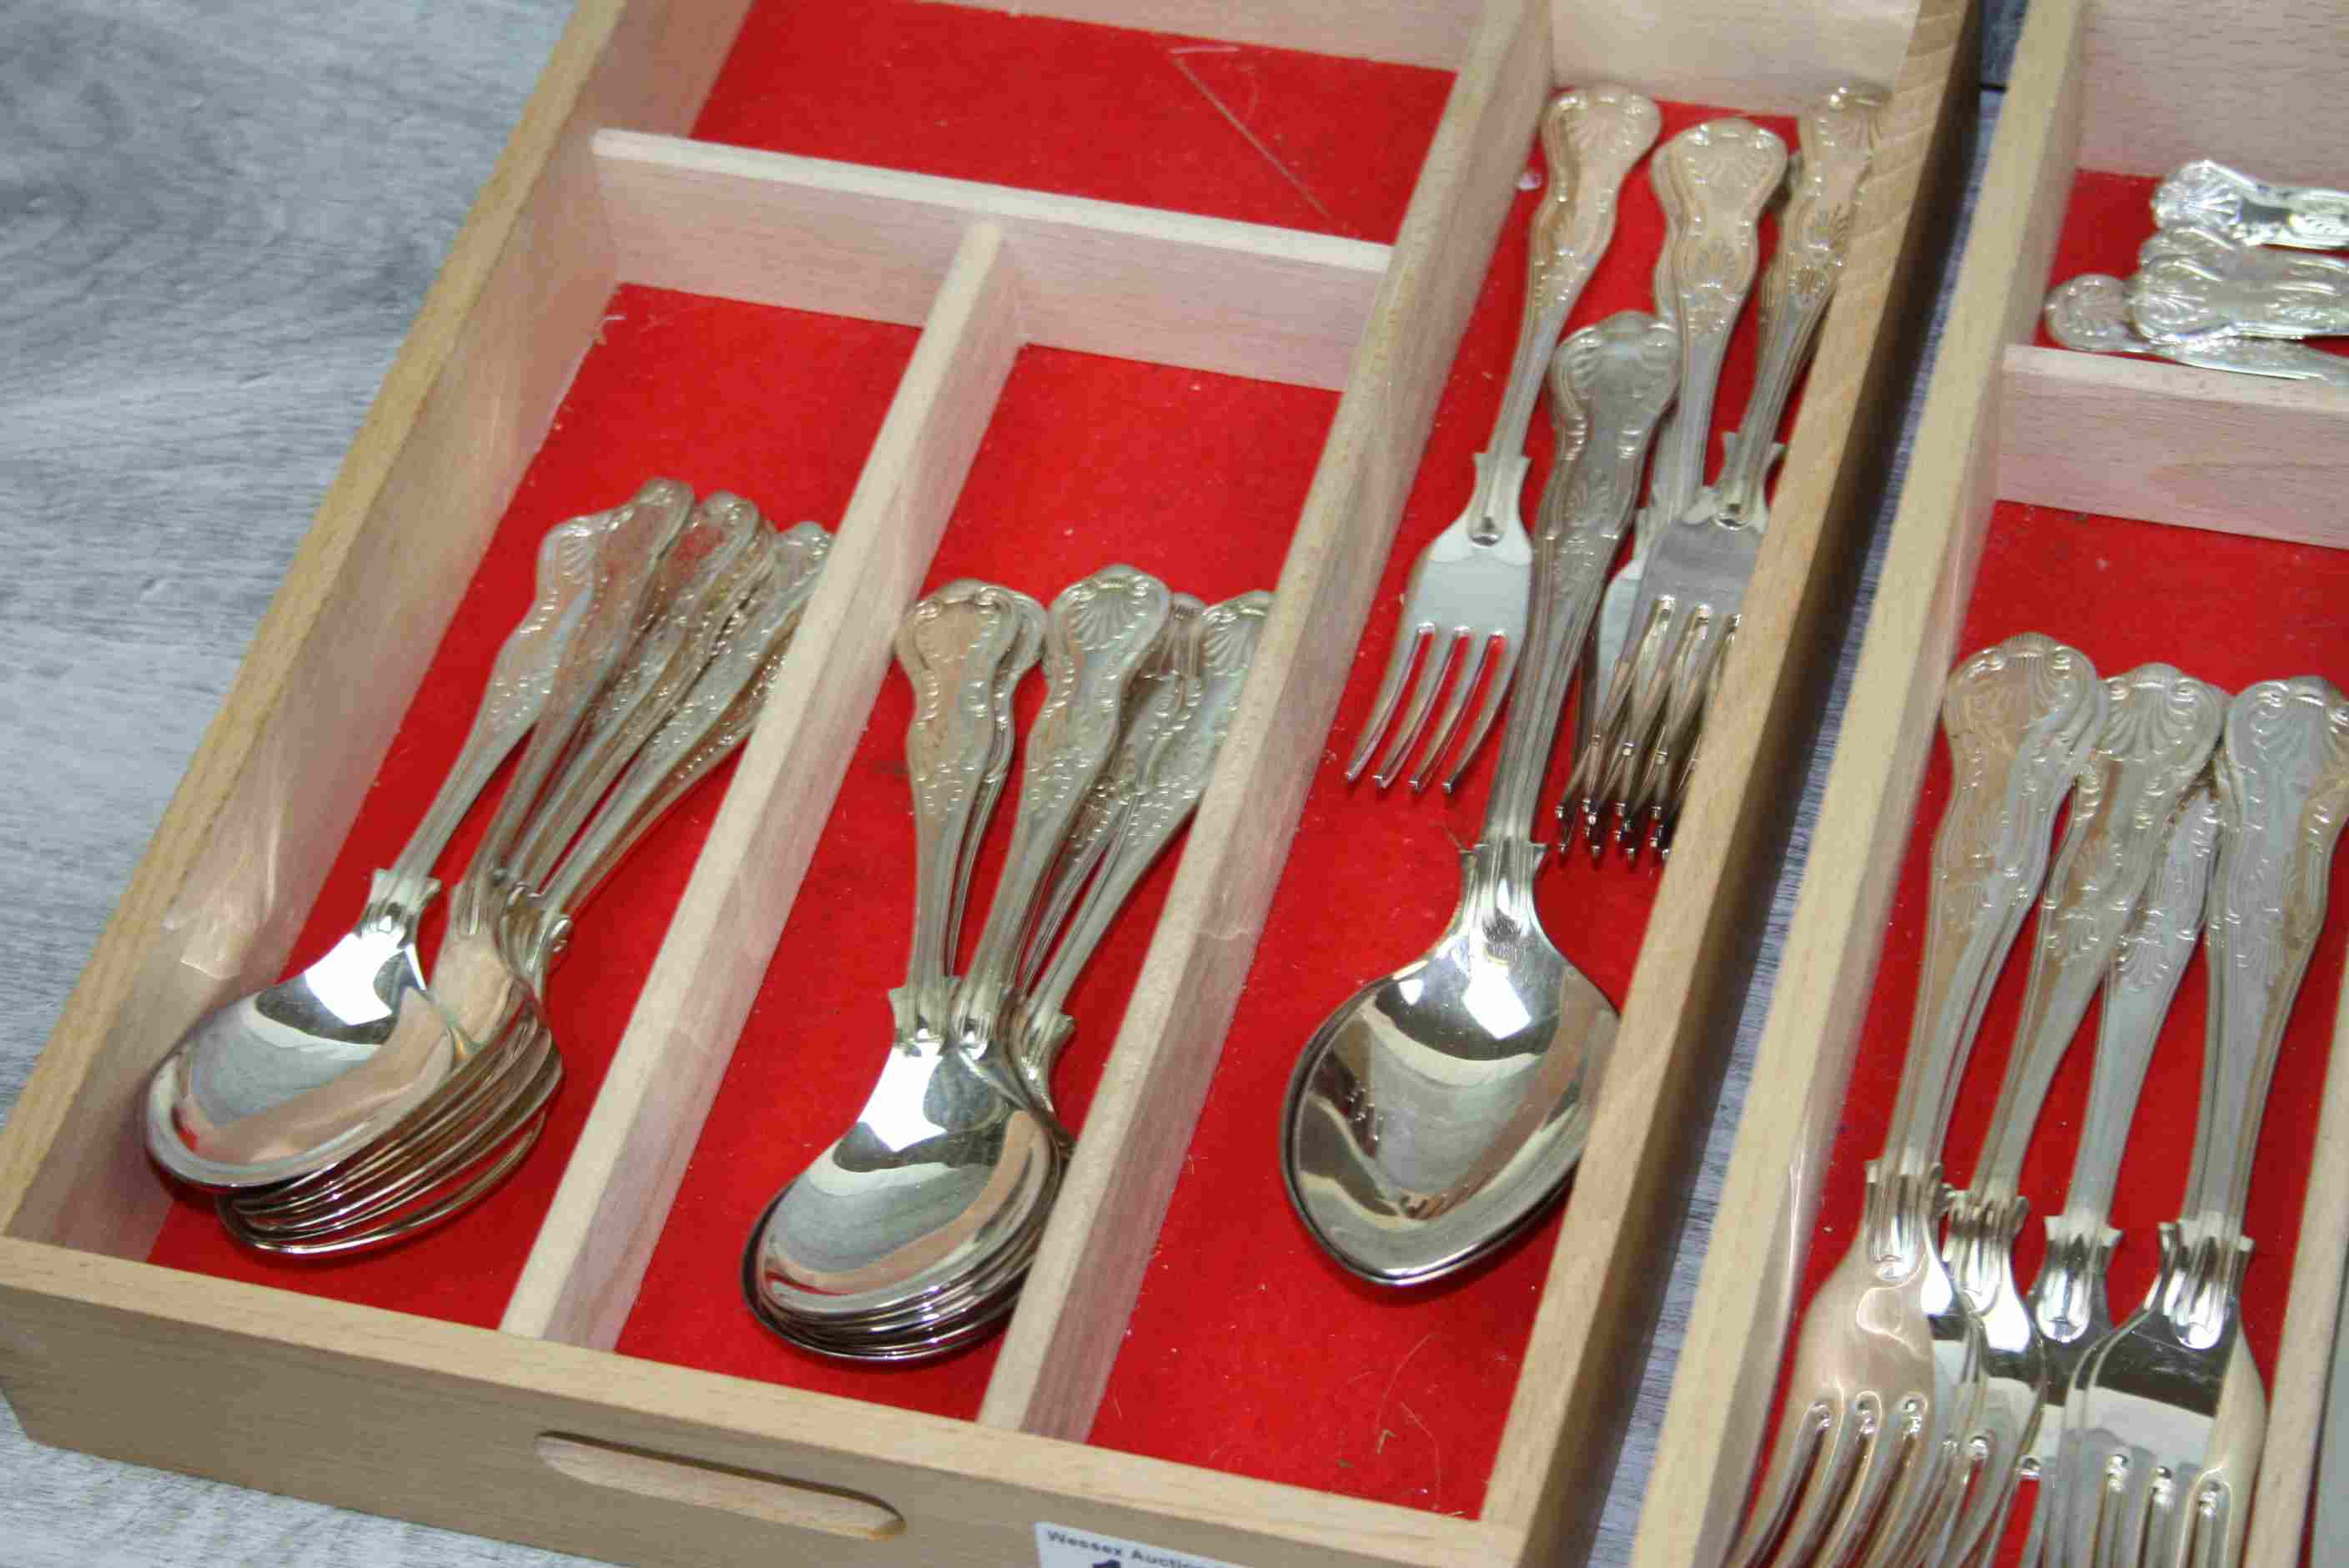 Set of Newbridge A1 Silver Plated Kings Pattern Cutlery, Six Place Setting, (44 pieces in total) - Image 3 of 4